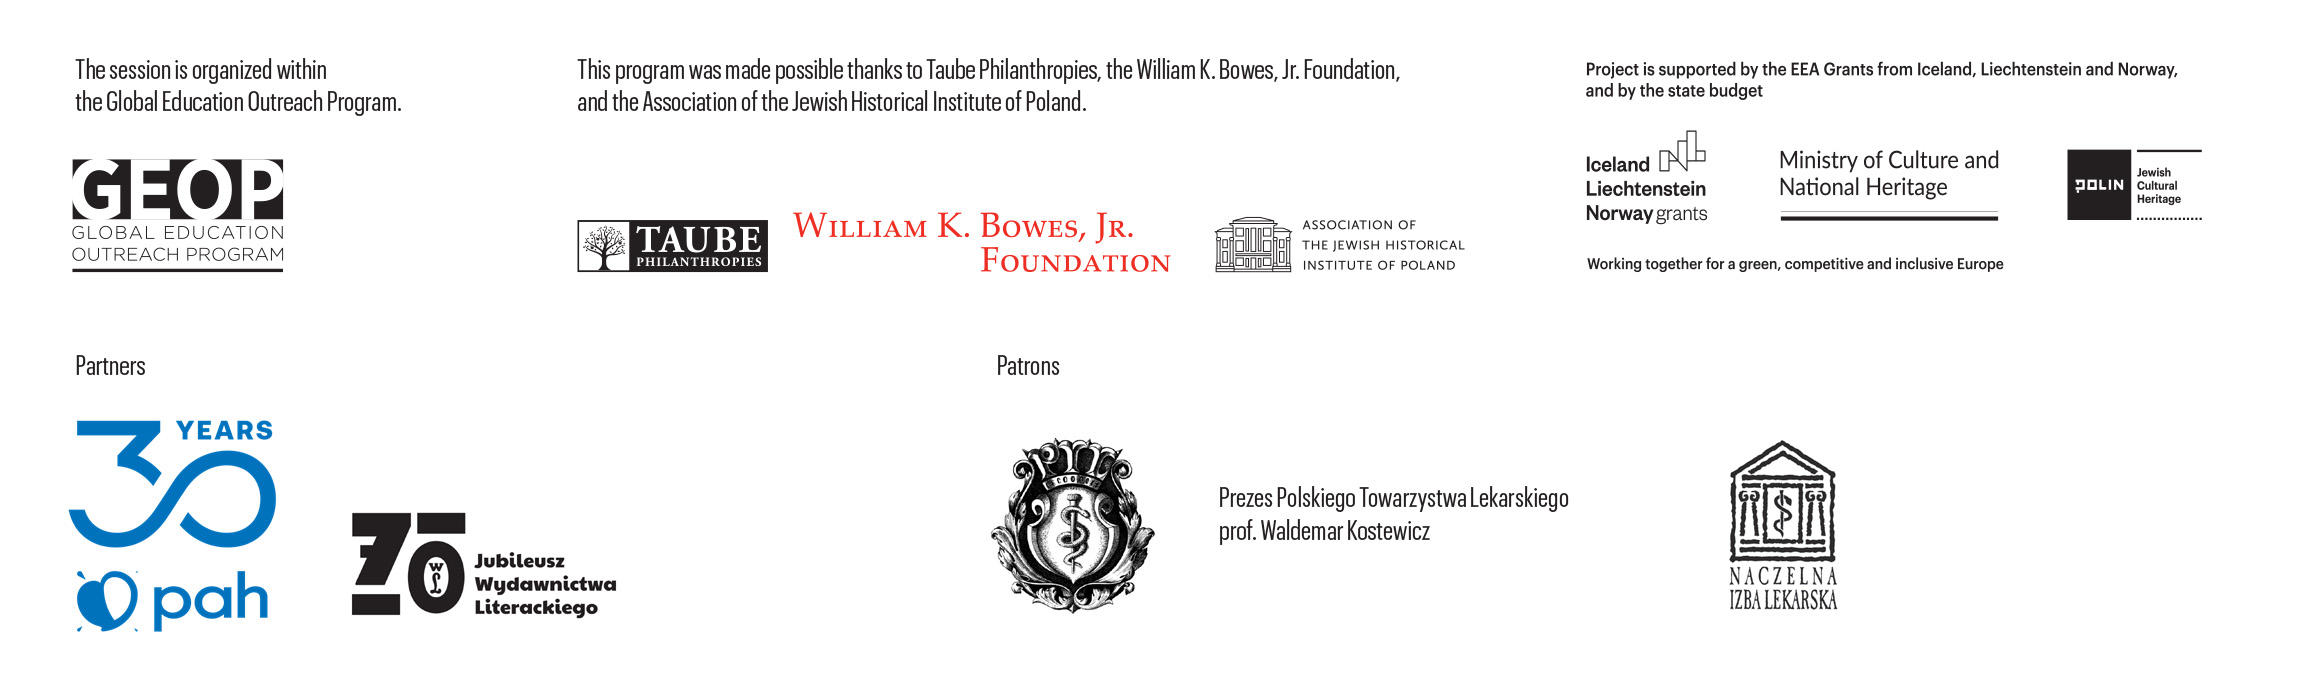 Logos of GEOP, Taube Philantropies, William K. Bowes Junior Foundation, Association ot the Jewish Historical Institute of Poland; logos of Jewish Cultural Heritage Project and patrons and partners of the session: Polish Humanitarian Action, Wydawnictwo Literackie Publishing House, Chair od the Chamber of Physicians and Dentists, and Polish Medical Association